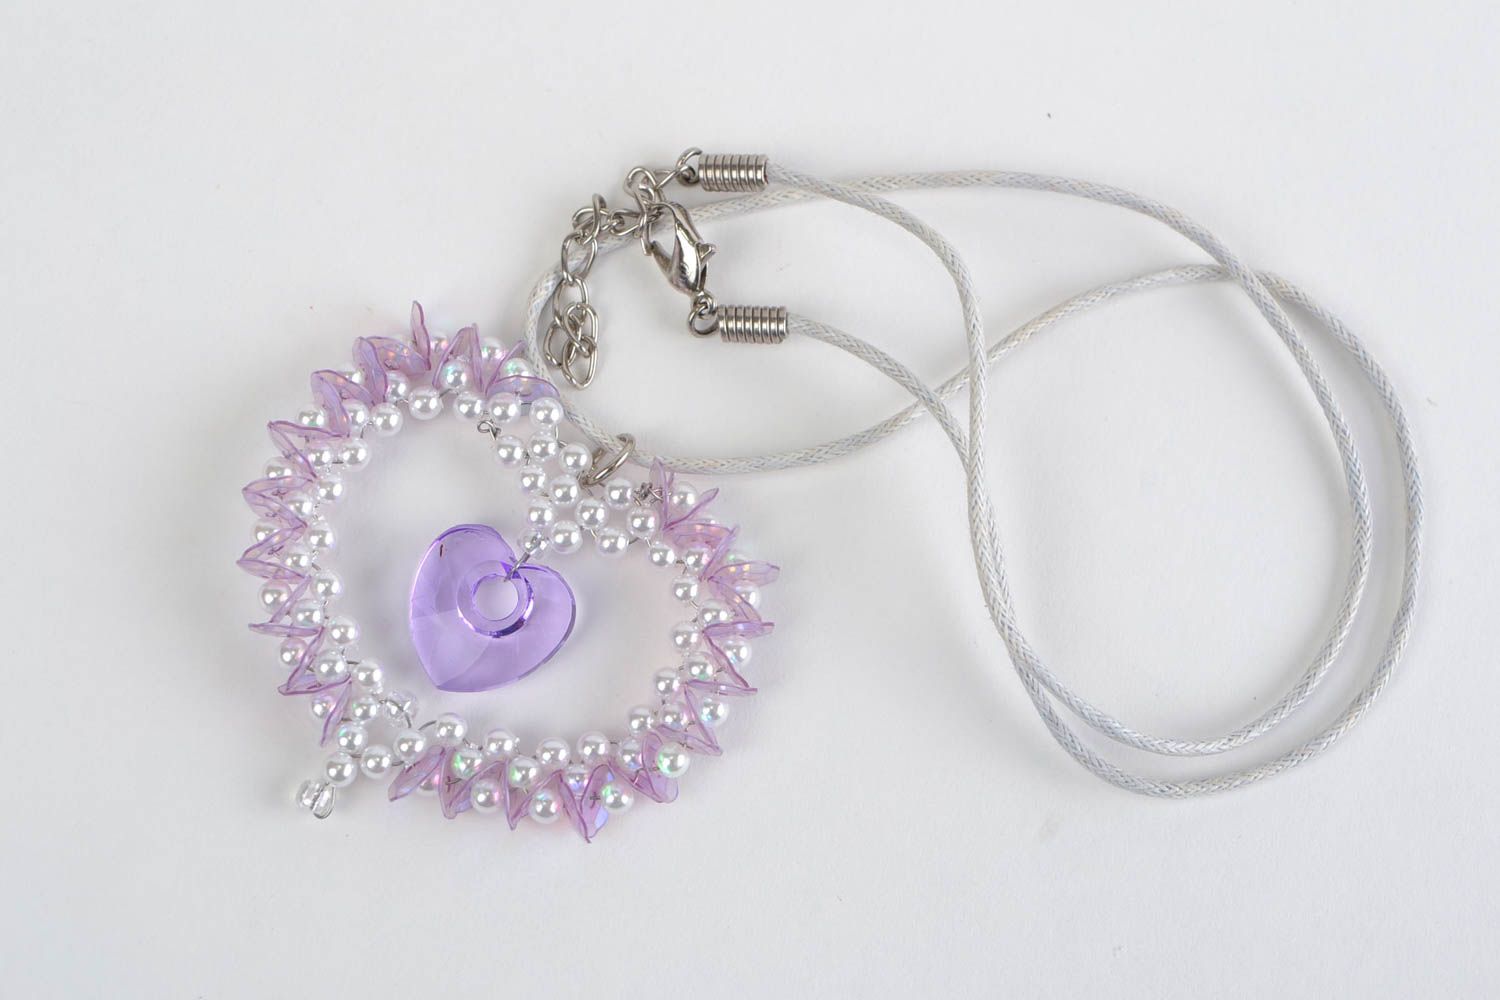 Handmade large pendant made of beads and sequins of lilac color on waxed cord photo 1